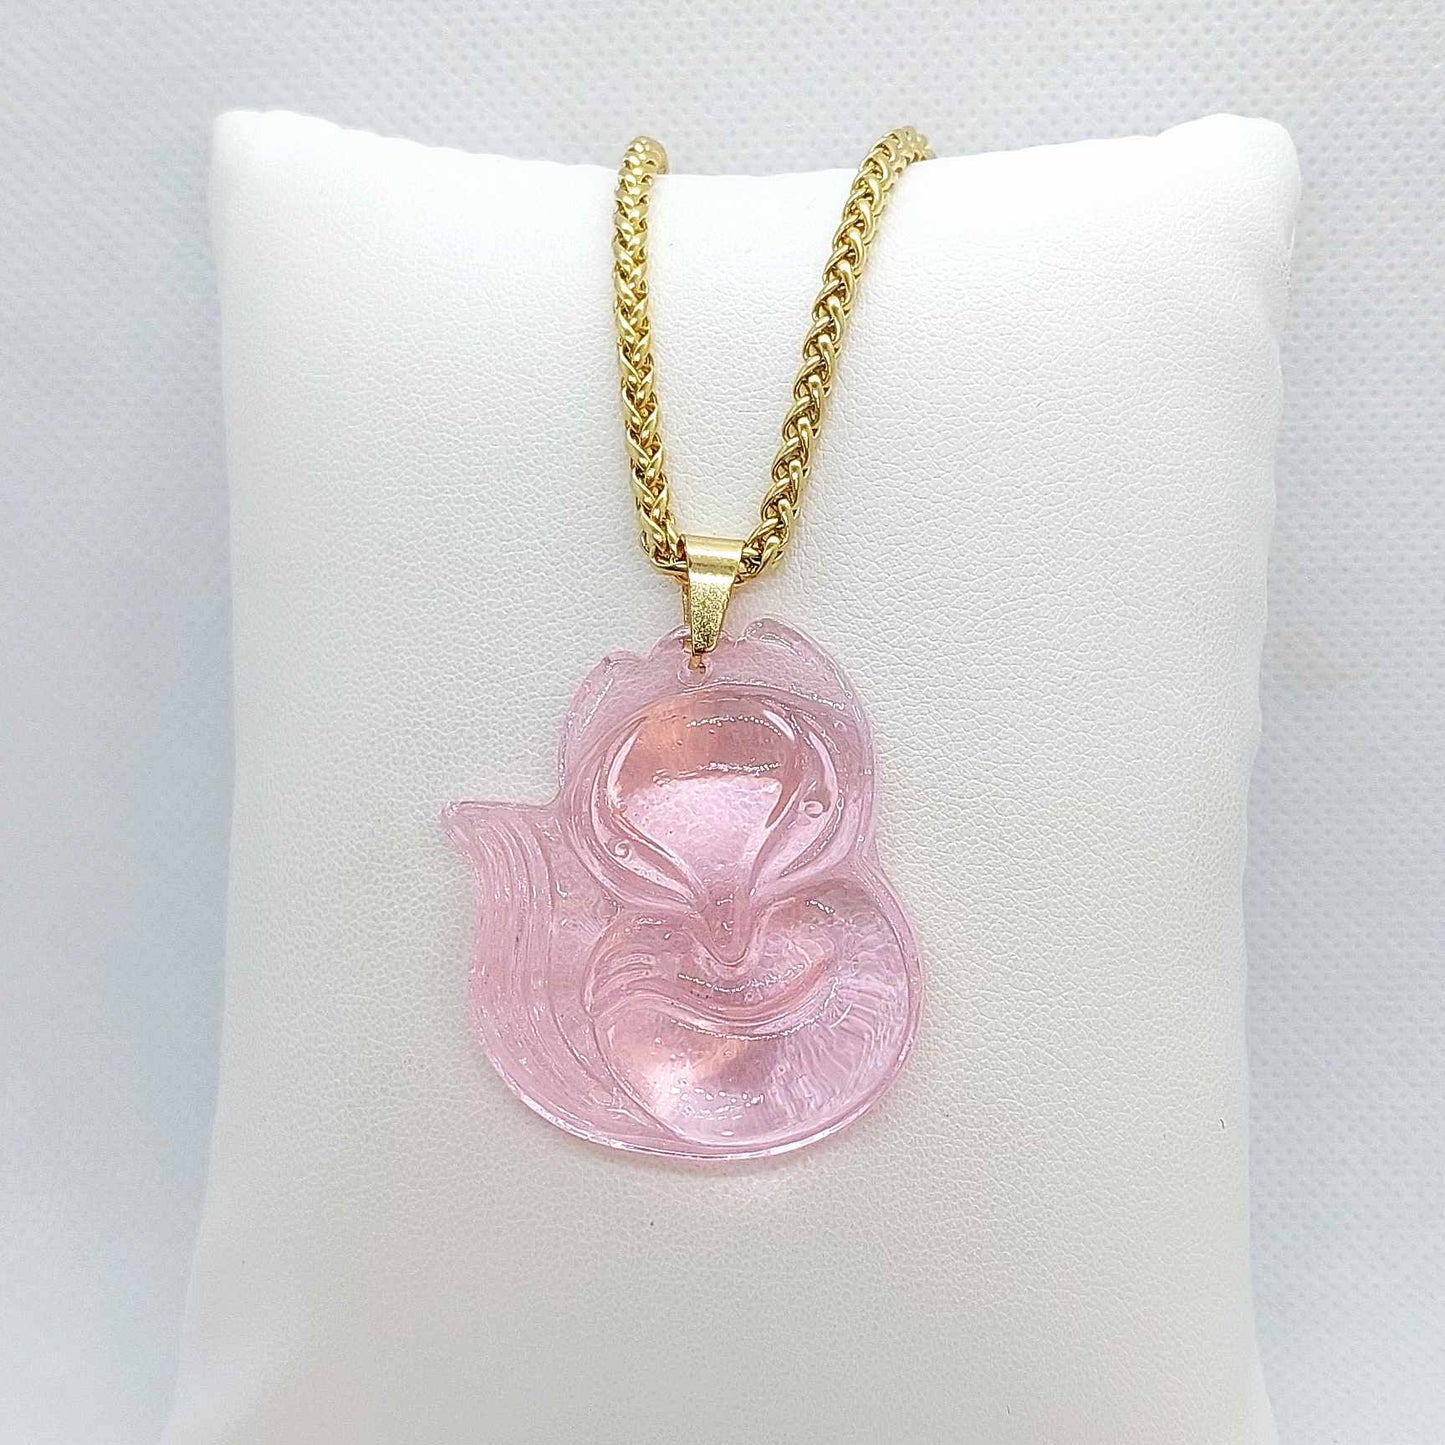 Natural Pink Chalcedony Nine Tailed Fox Pendant with Stainless Steel Chain Necklace